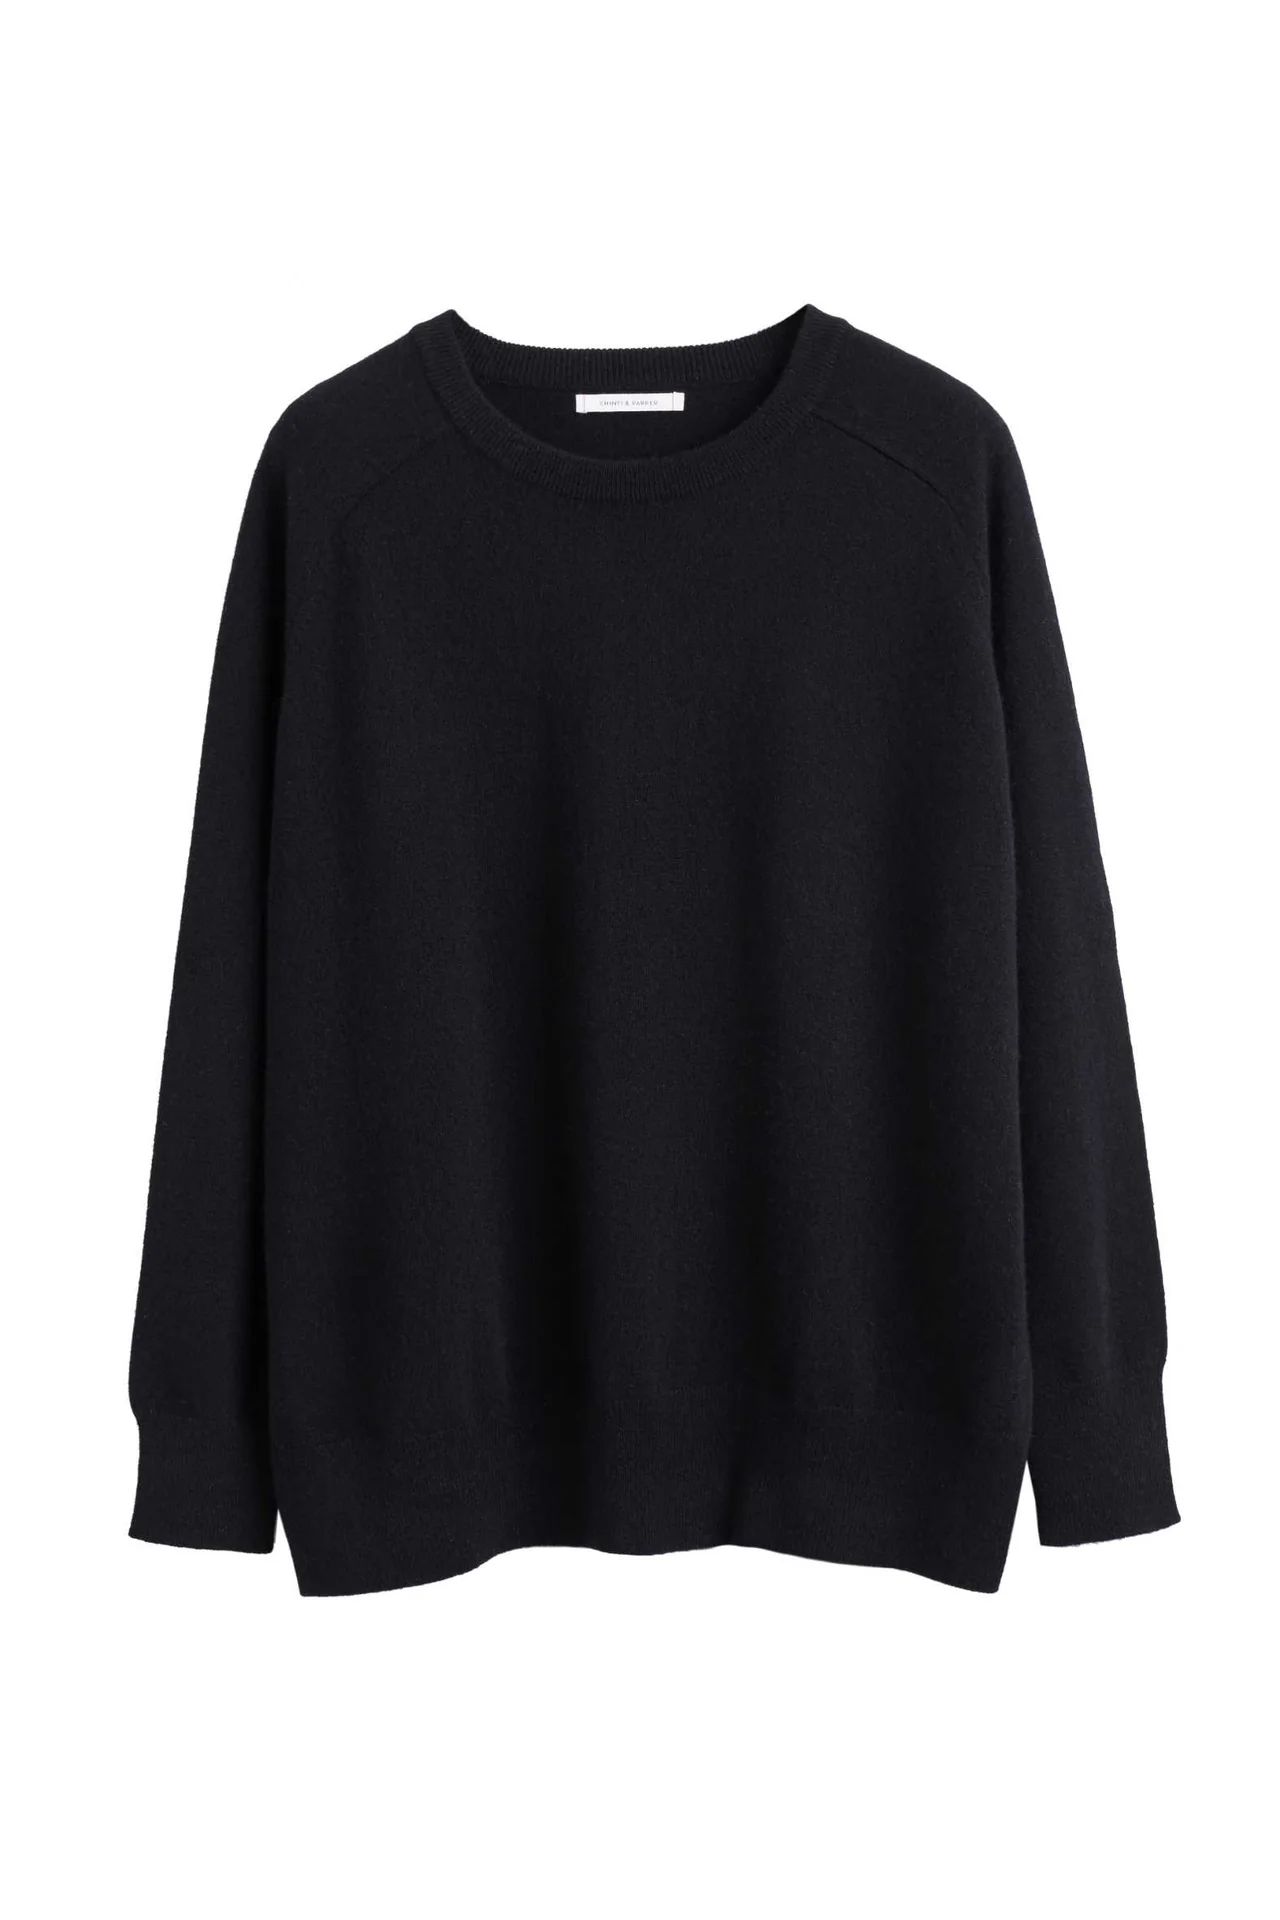 Black Cashmere Slouchy Sweater | Chinti and Parker